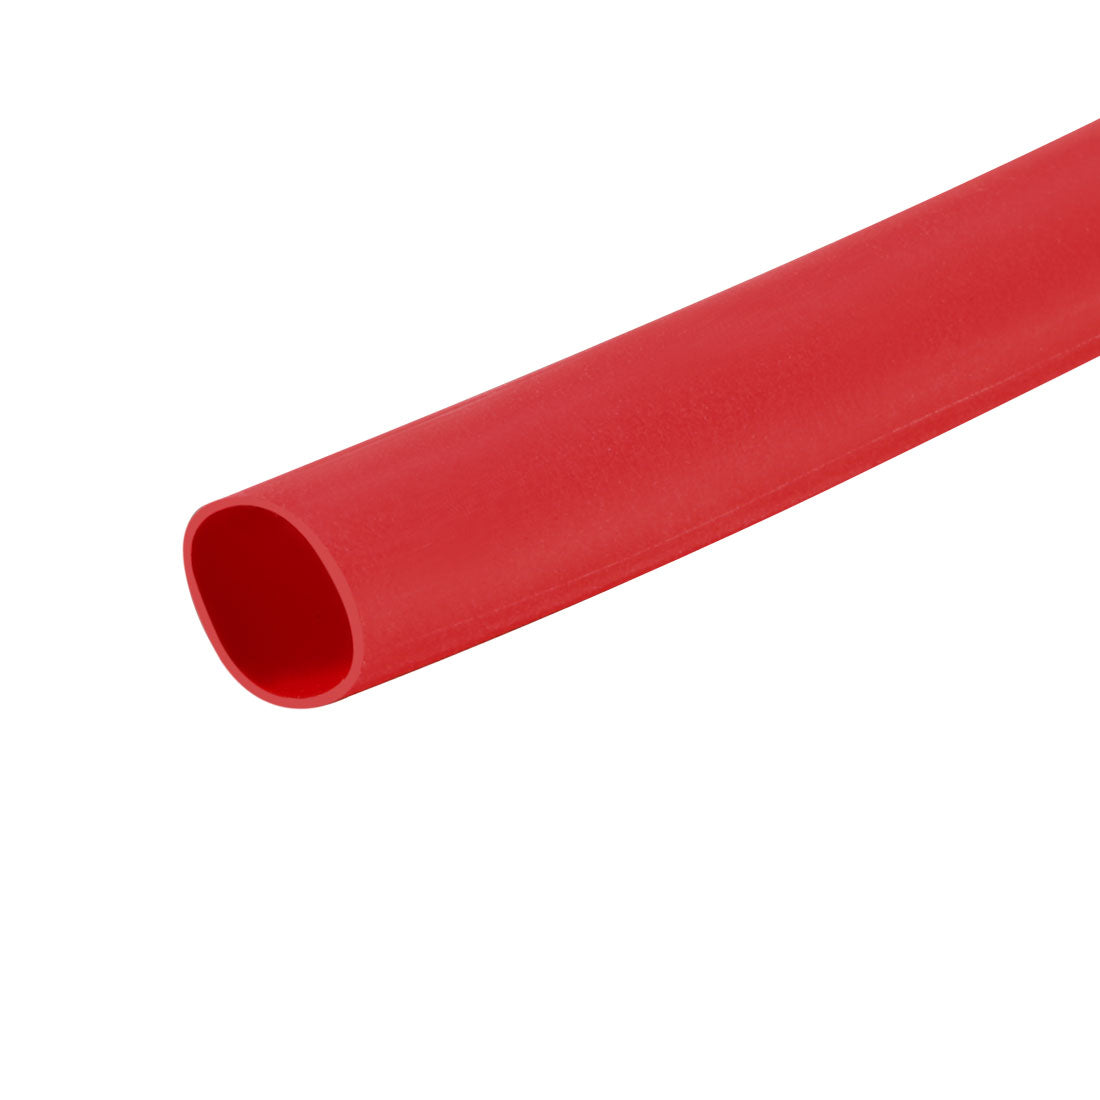 uxcell Uxcell Heat Shrink Tube 2:1 Electrical Insulation Tube Wire Cable Tubing Sleeving Wrap Red 4mm Diameter 1m Long